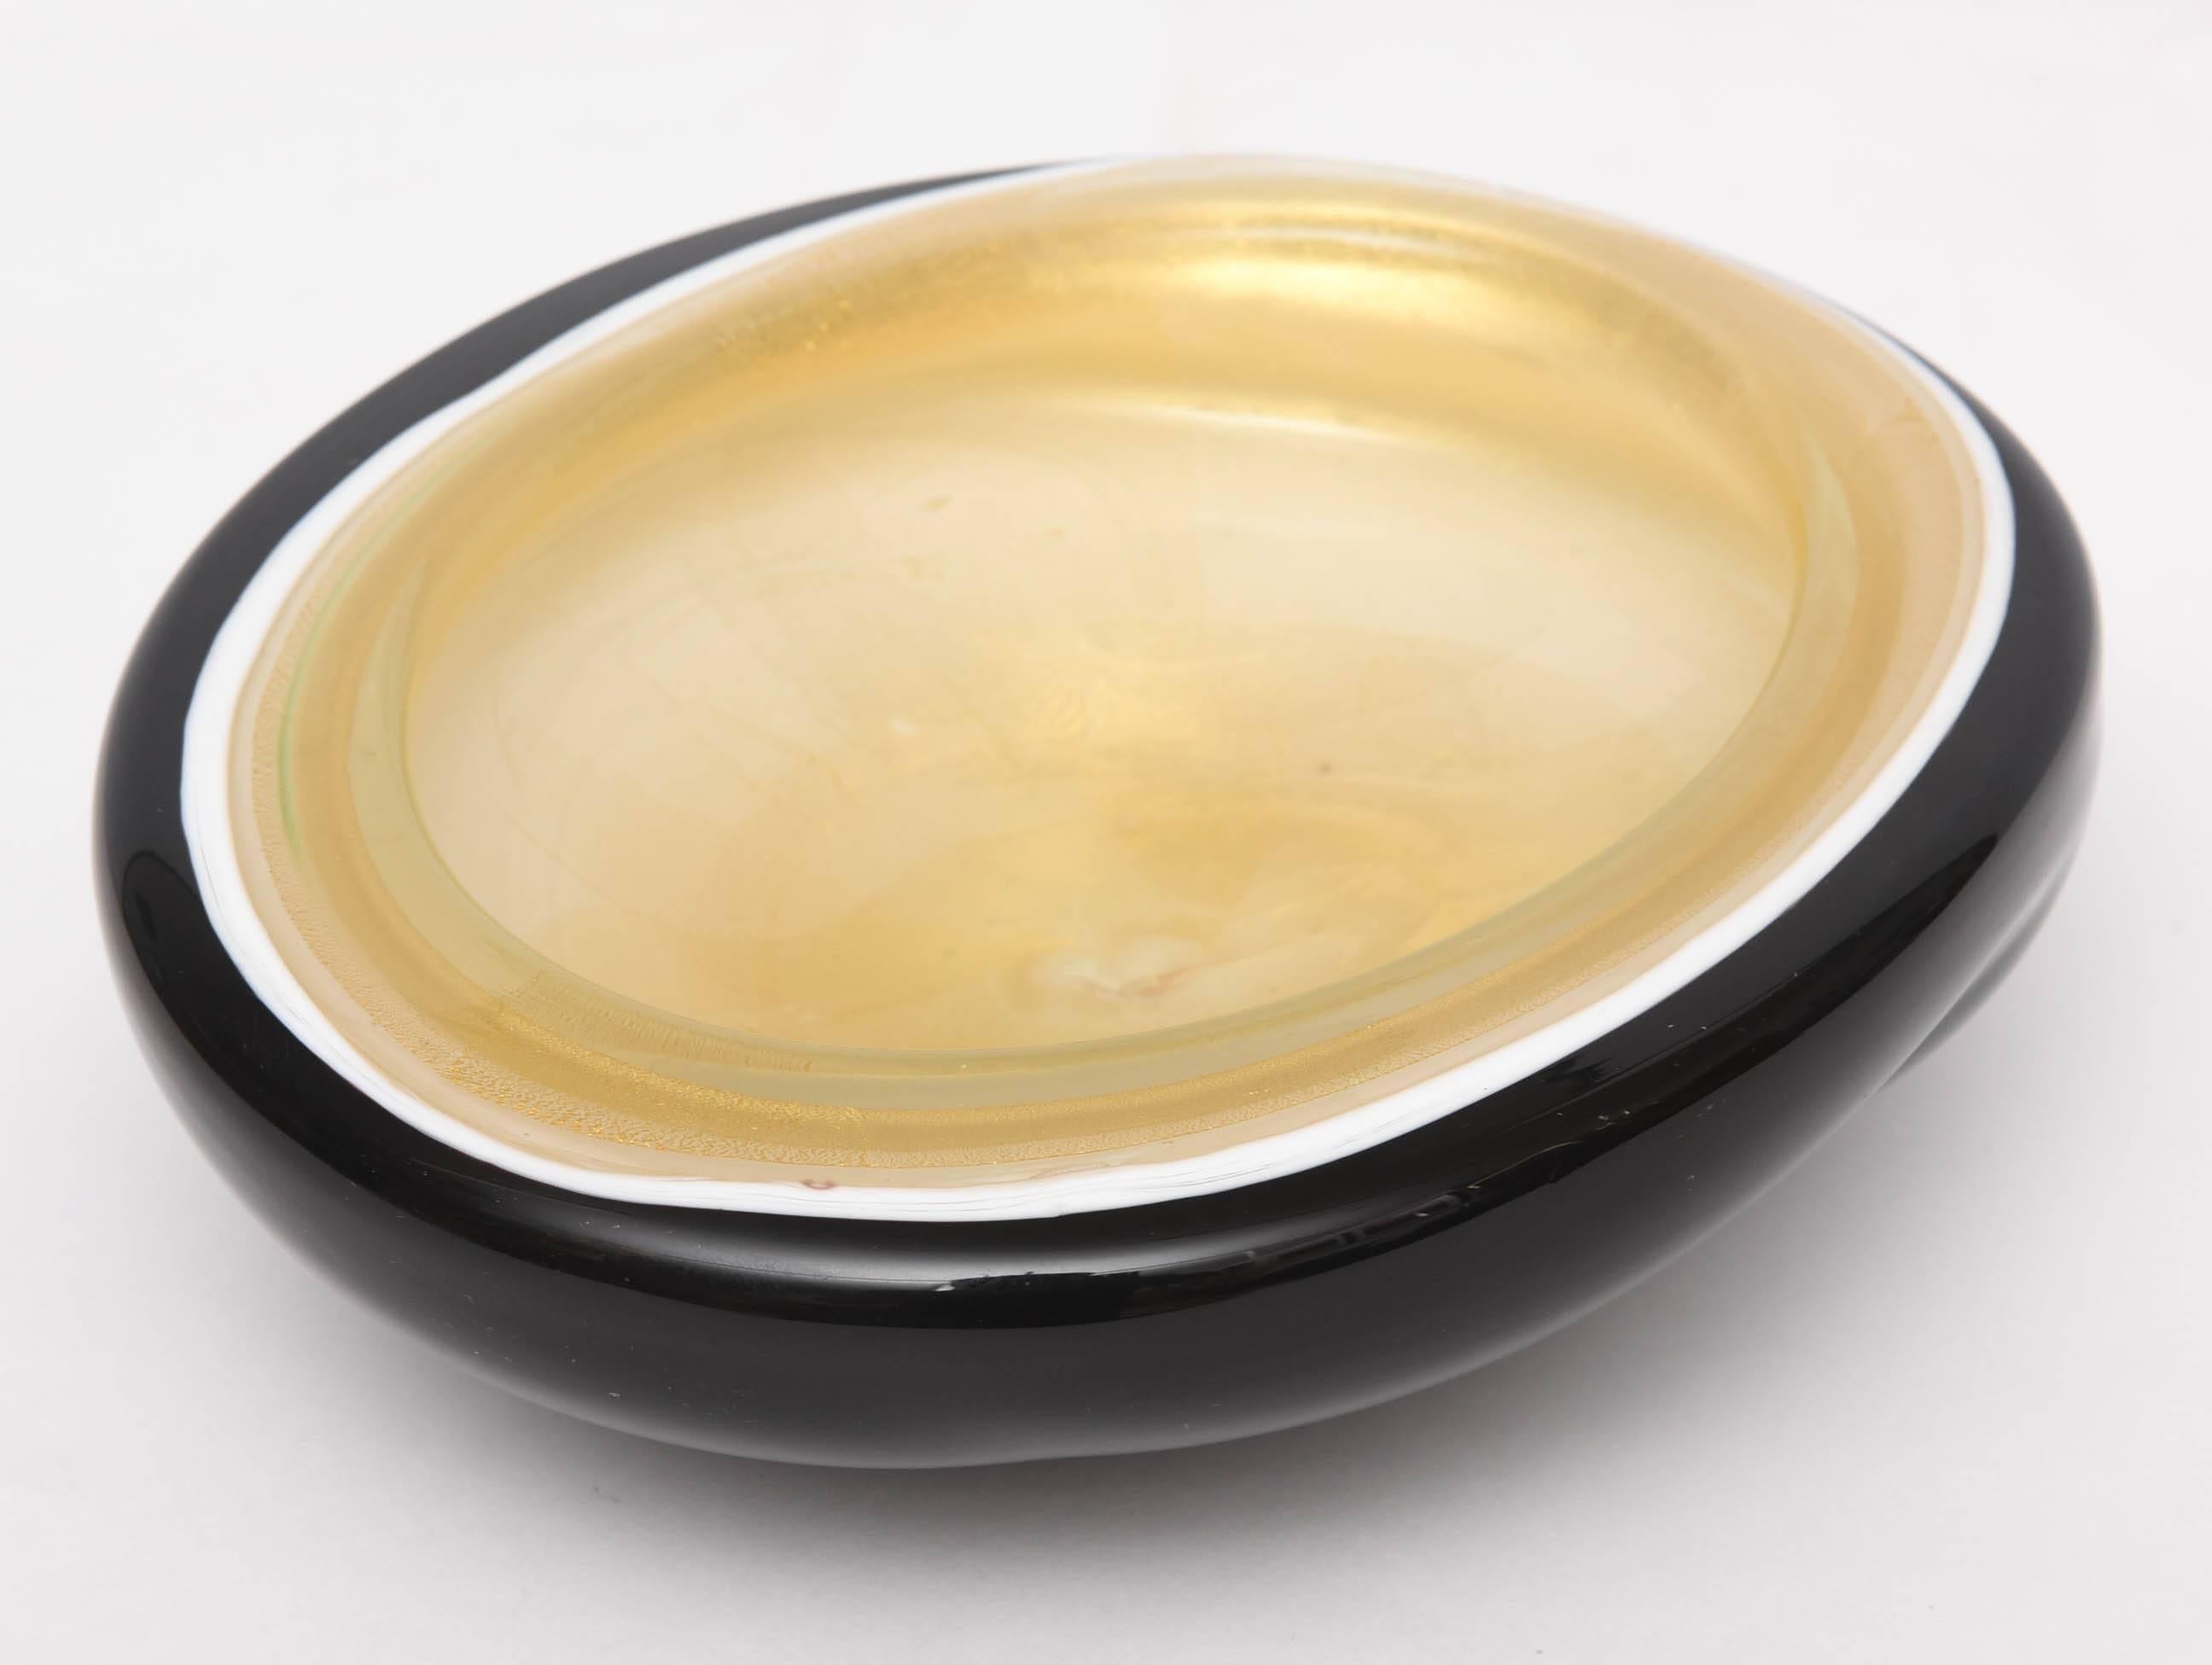 Mid-Century Modern Camer Glass New York  Glass Inspired Abalone Look Dish, 1960s, USA For Sale